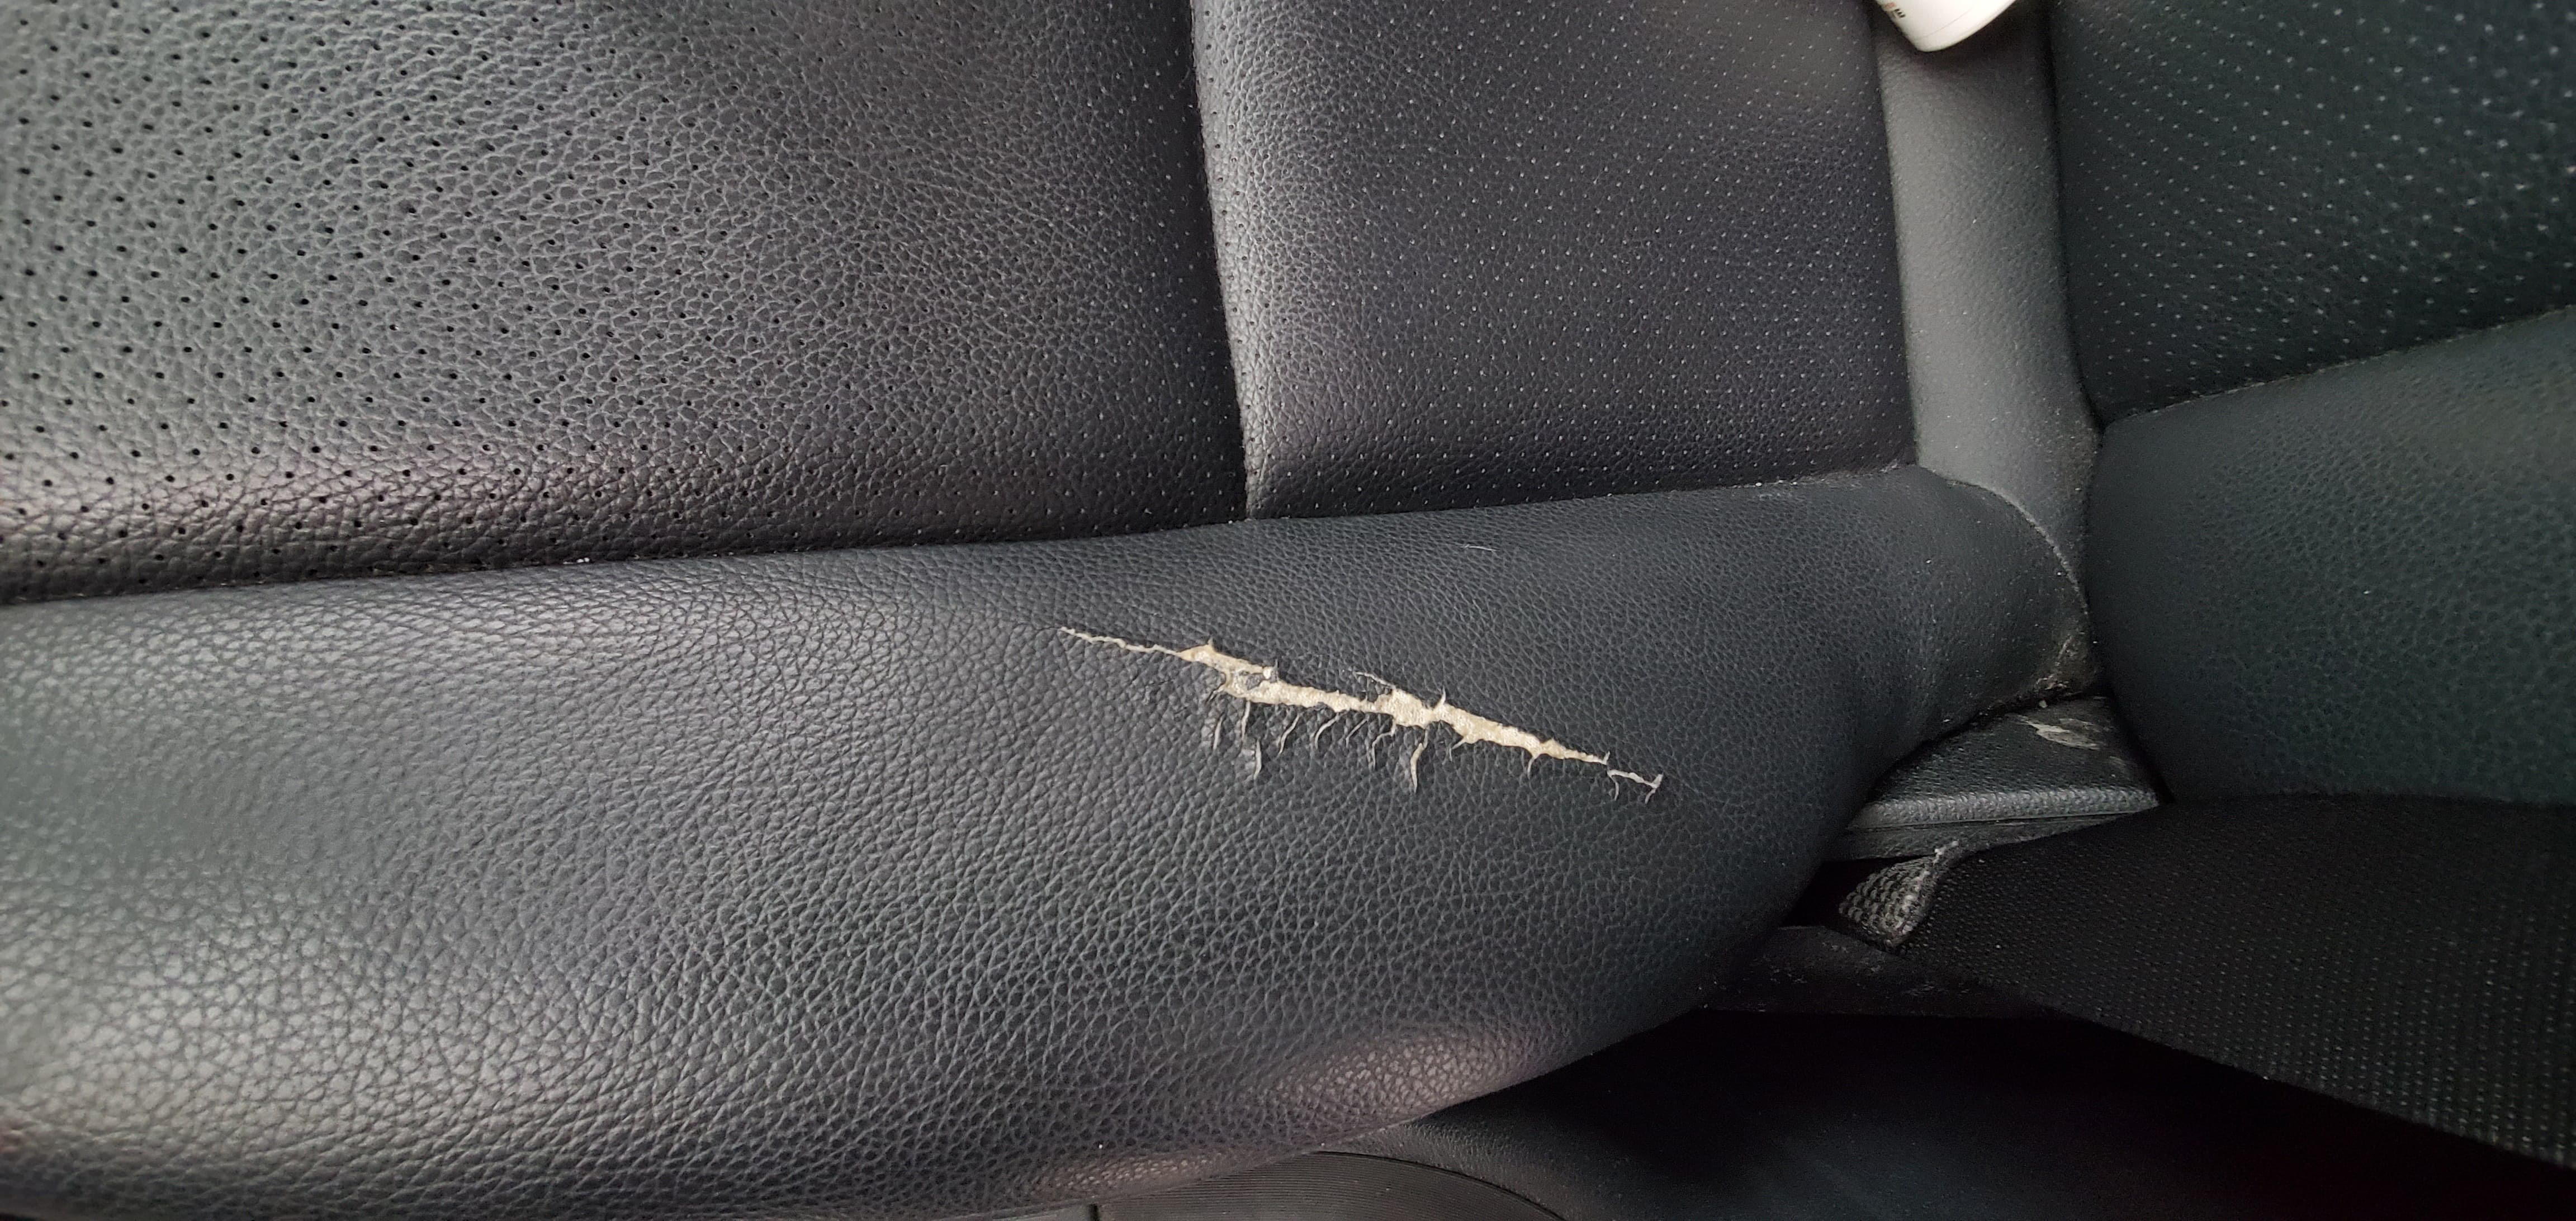 How To Repair A Leather Car Seat - How To Fix Tear In Leather Car Seat